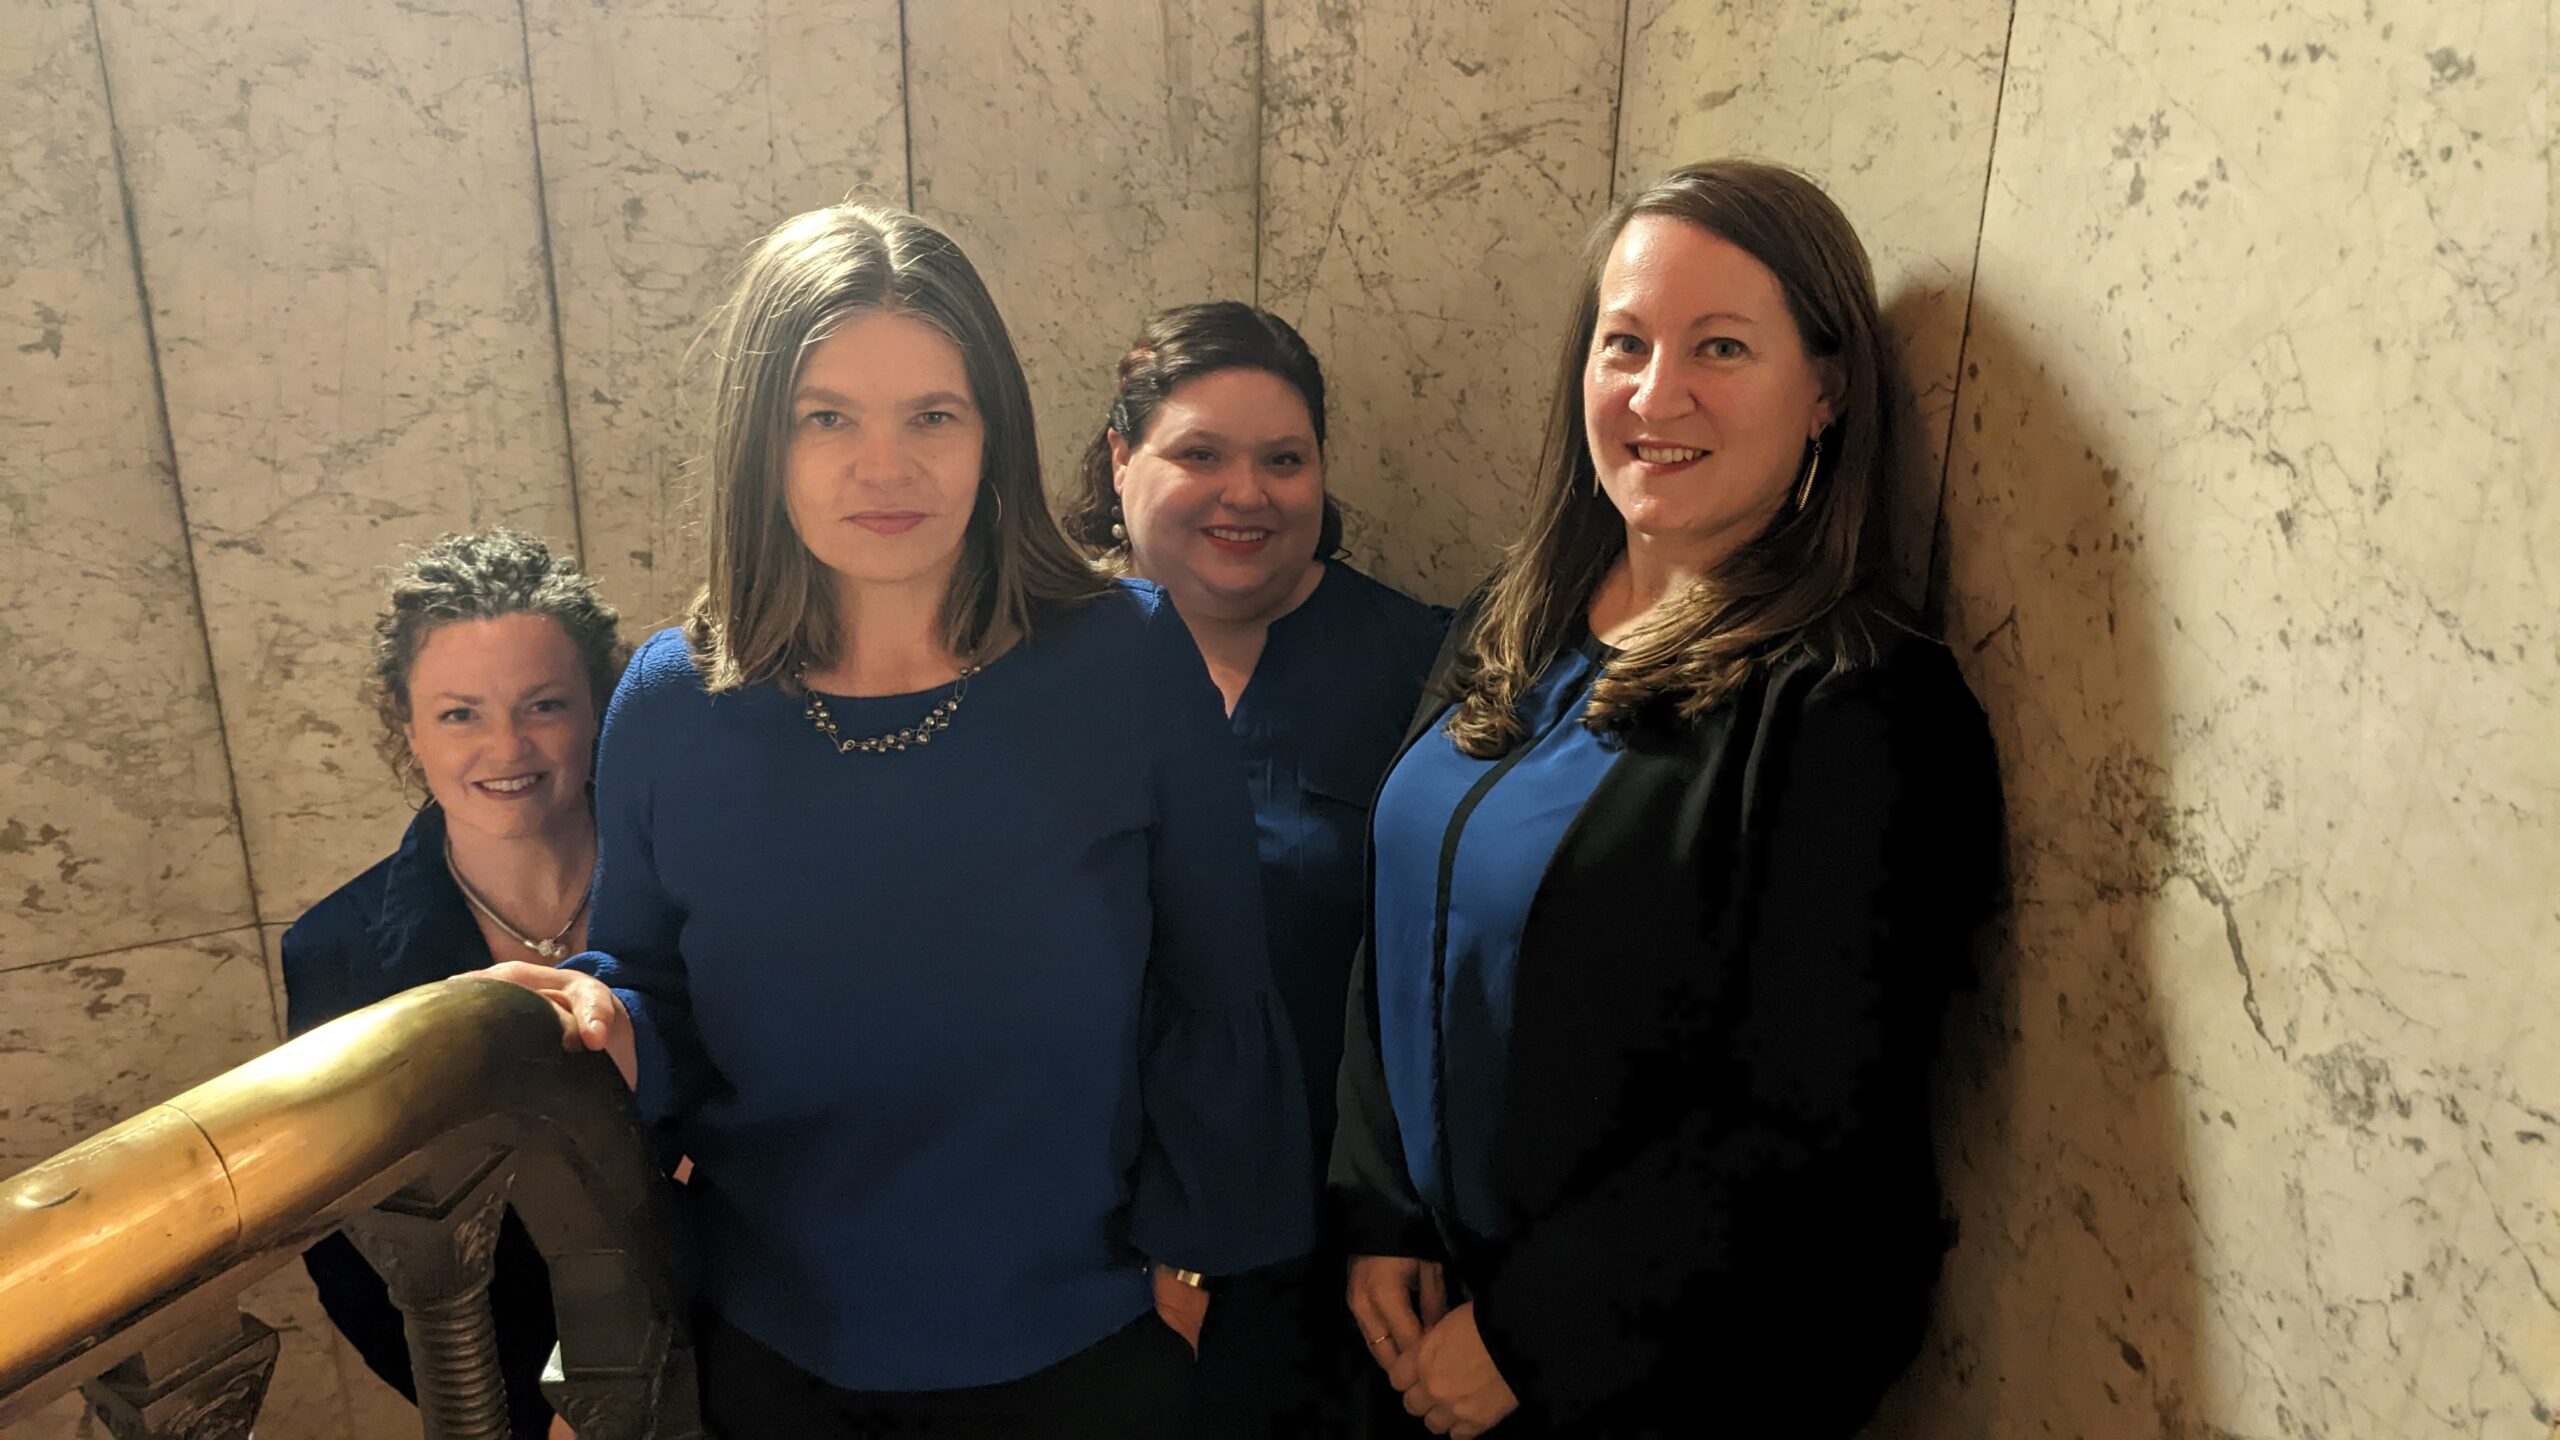 The four members of Lumina Women's ensemble stand together in a stairway, all smiling at the camera. Two women are in the foreground and two staggered behind them on a lower stair. All four women are wearing blue.